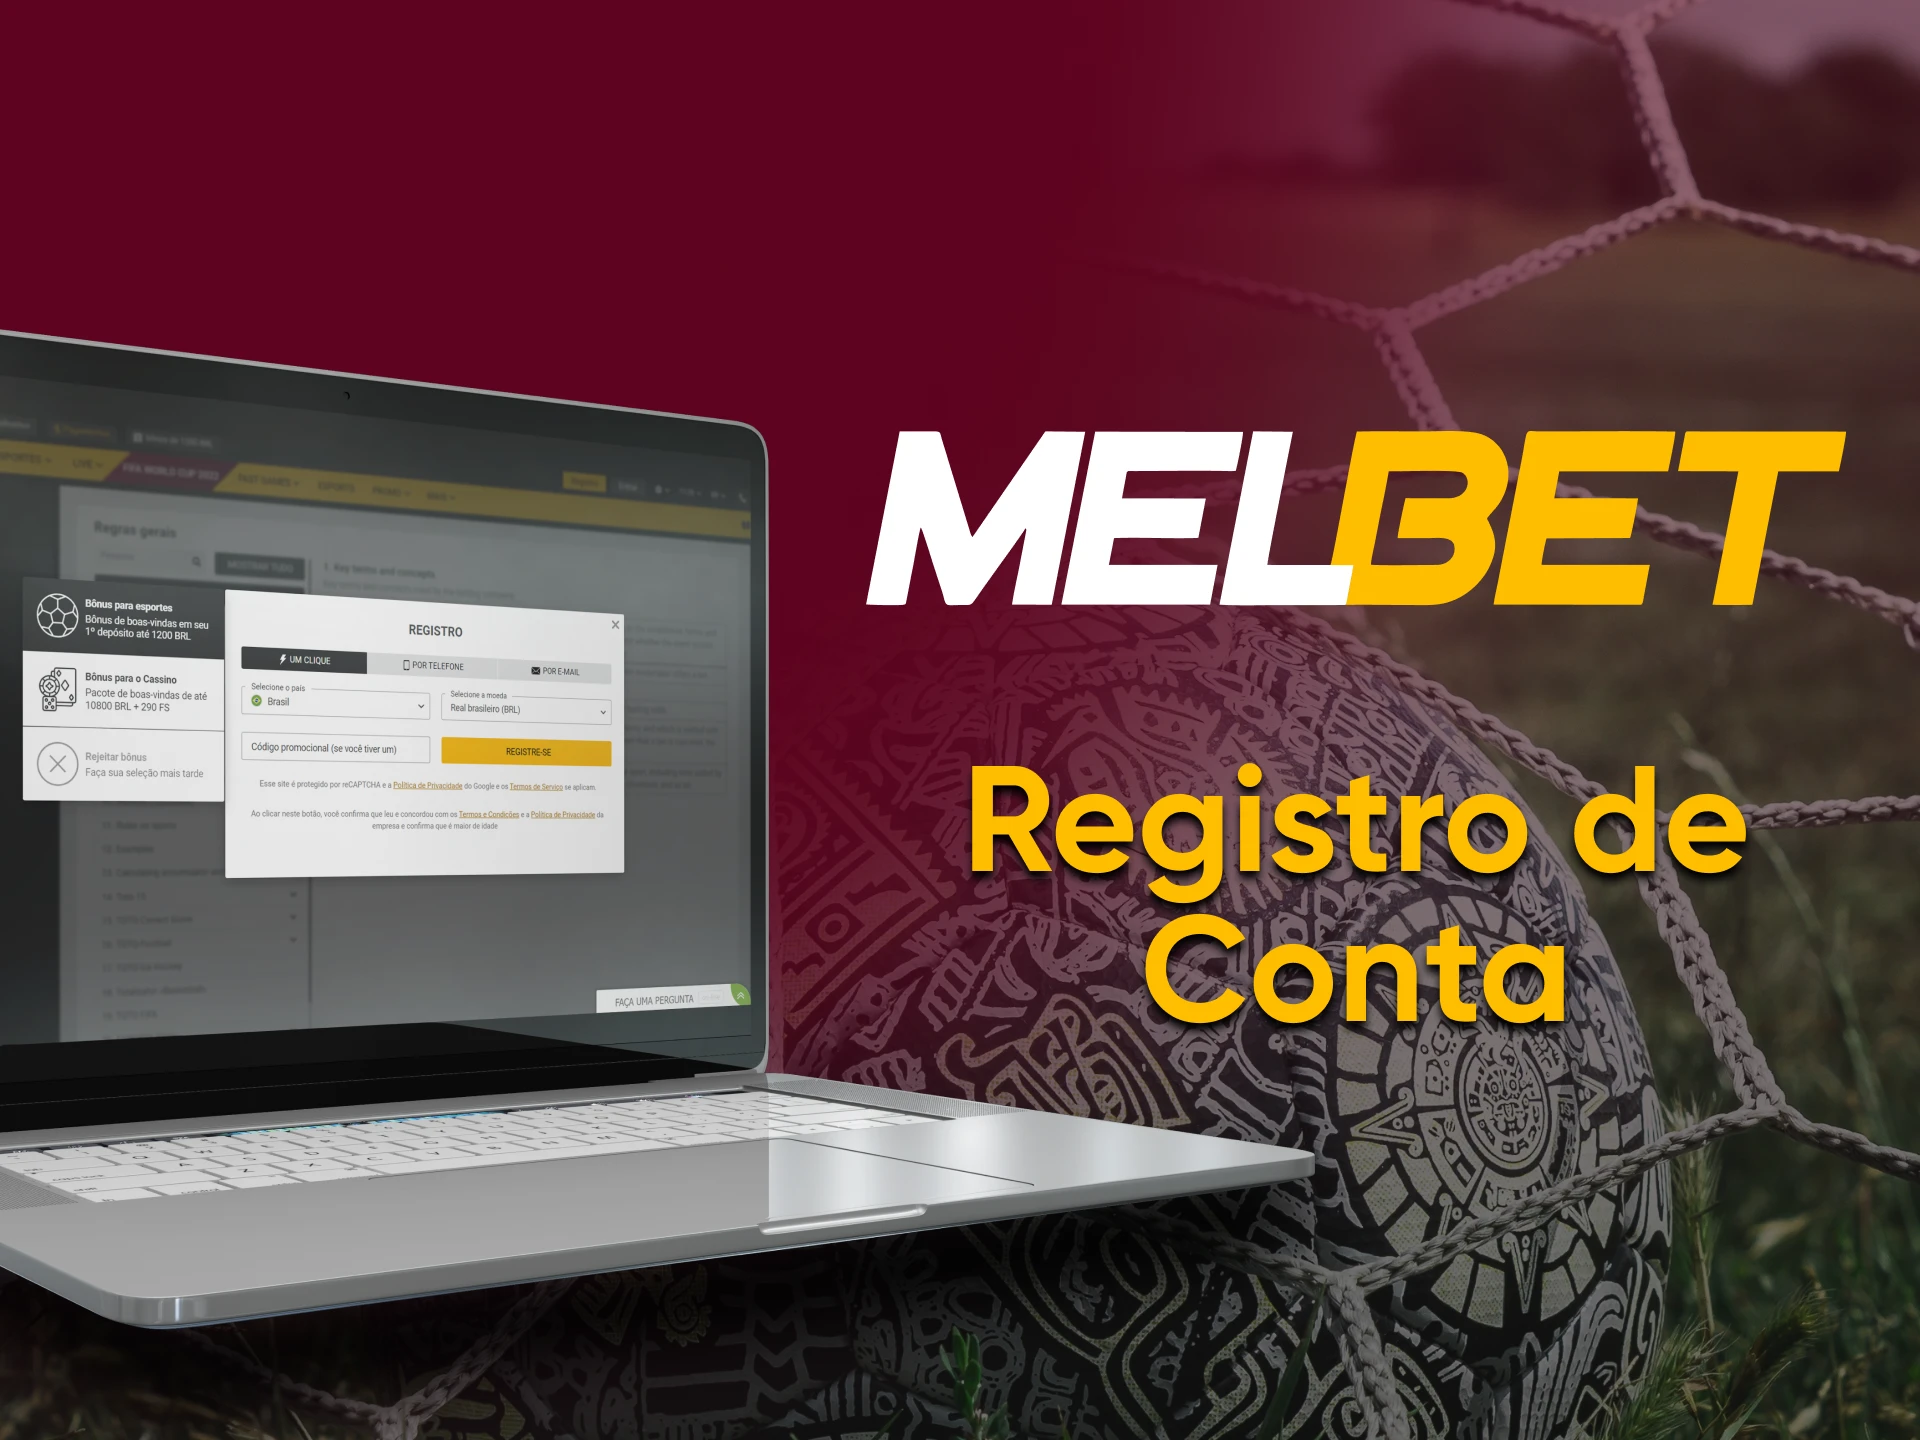 Registration is required to use Melbet.